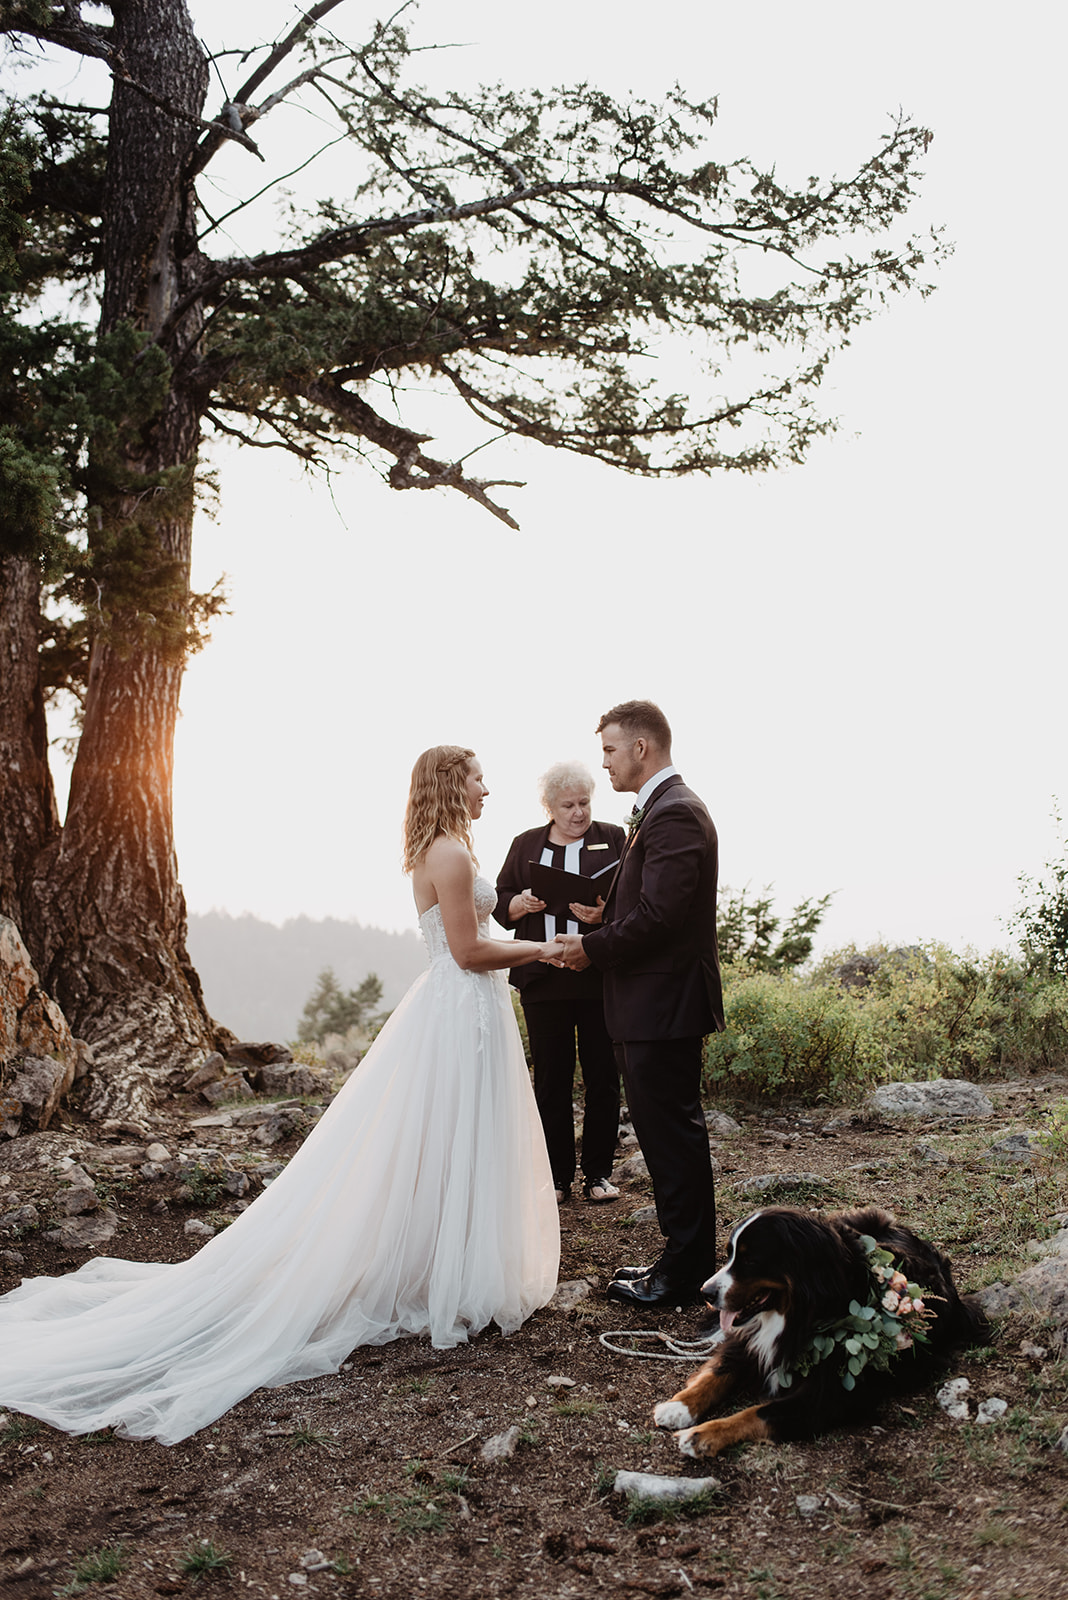 wedding tree in Jackson Hole ceremony inthe summer with bride and groom holding hands and saying their vows under the tree as the sun sets in the distance over the mountains